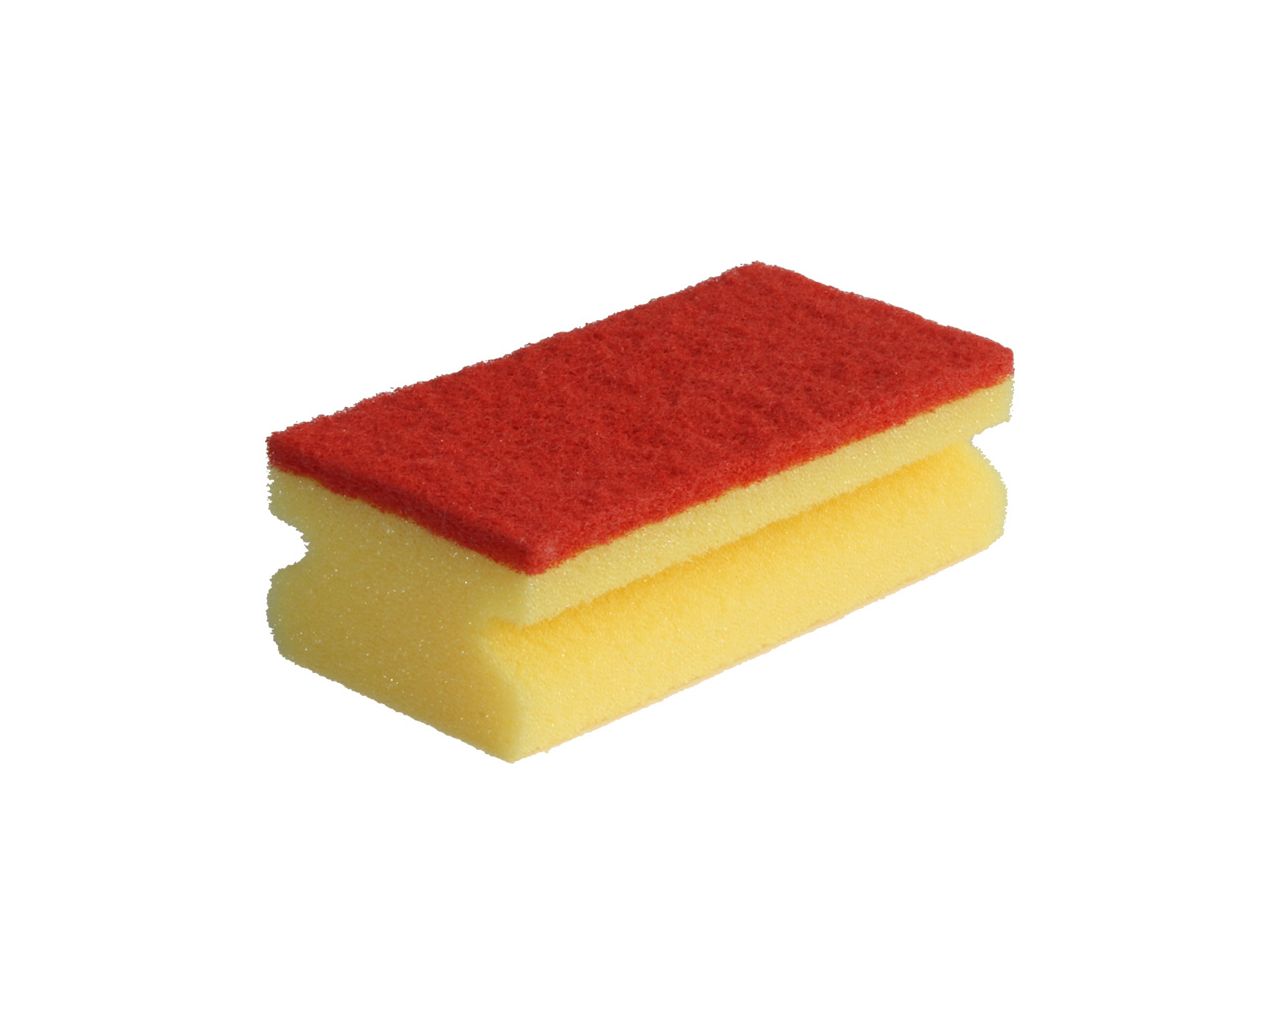 Easy grip foam backed scourer for professional use, 10 pcs. / package (yellow with red scouring surface)